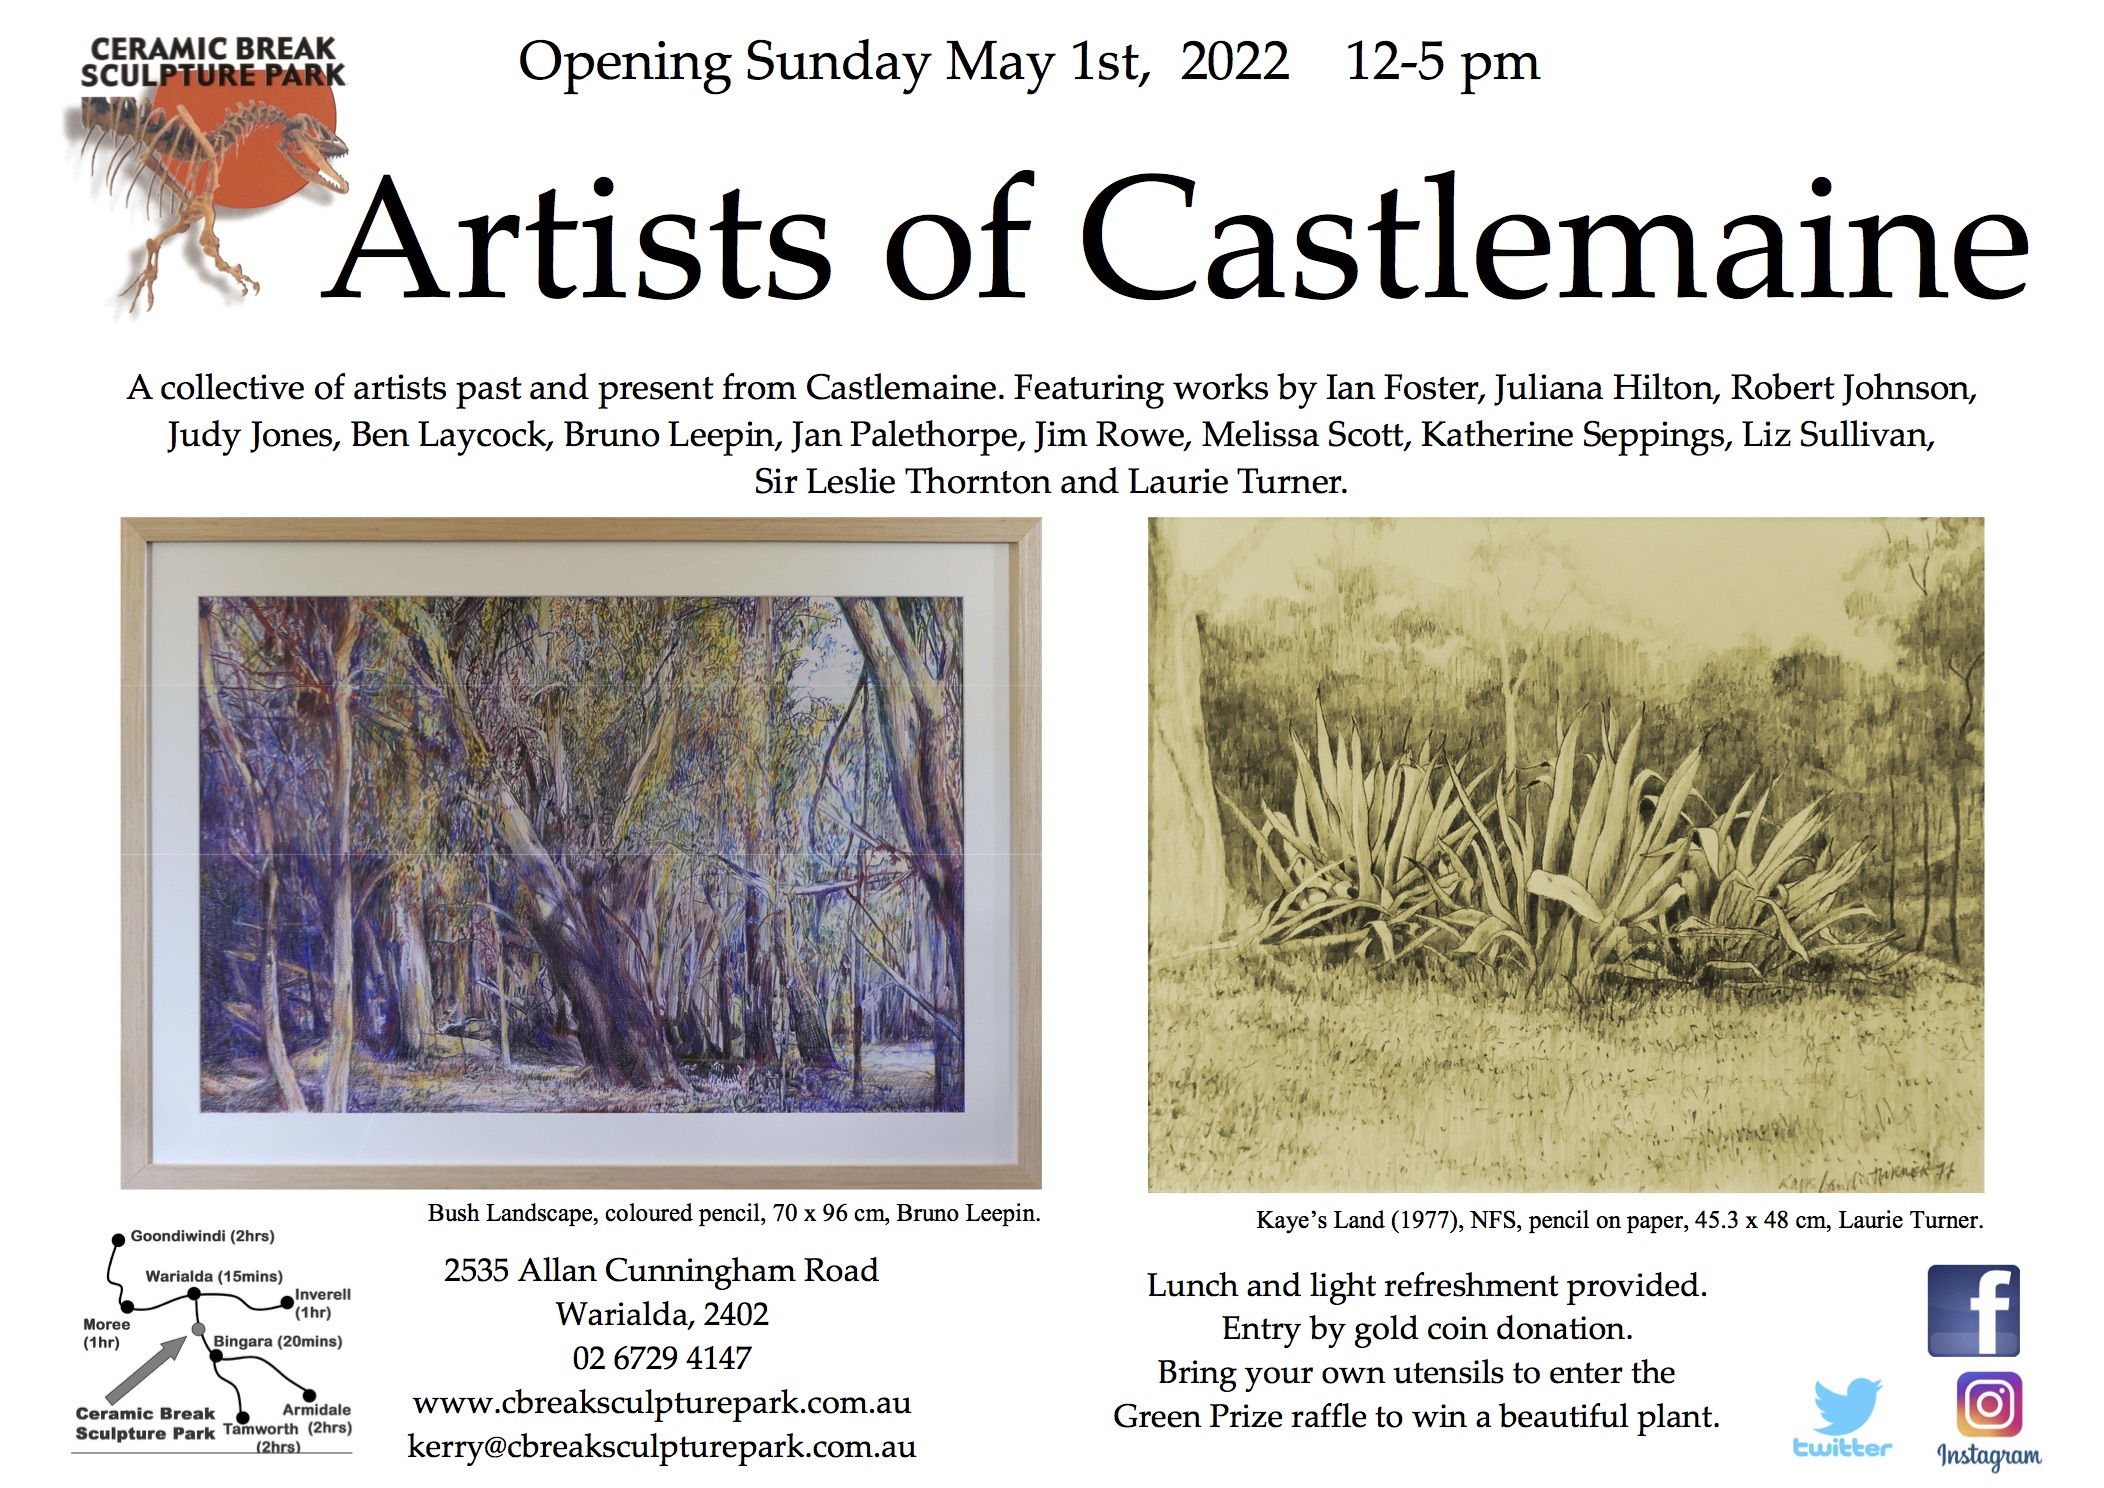 Artists of Castlemaine